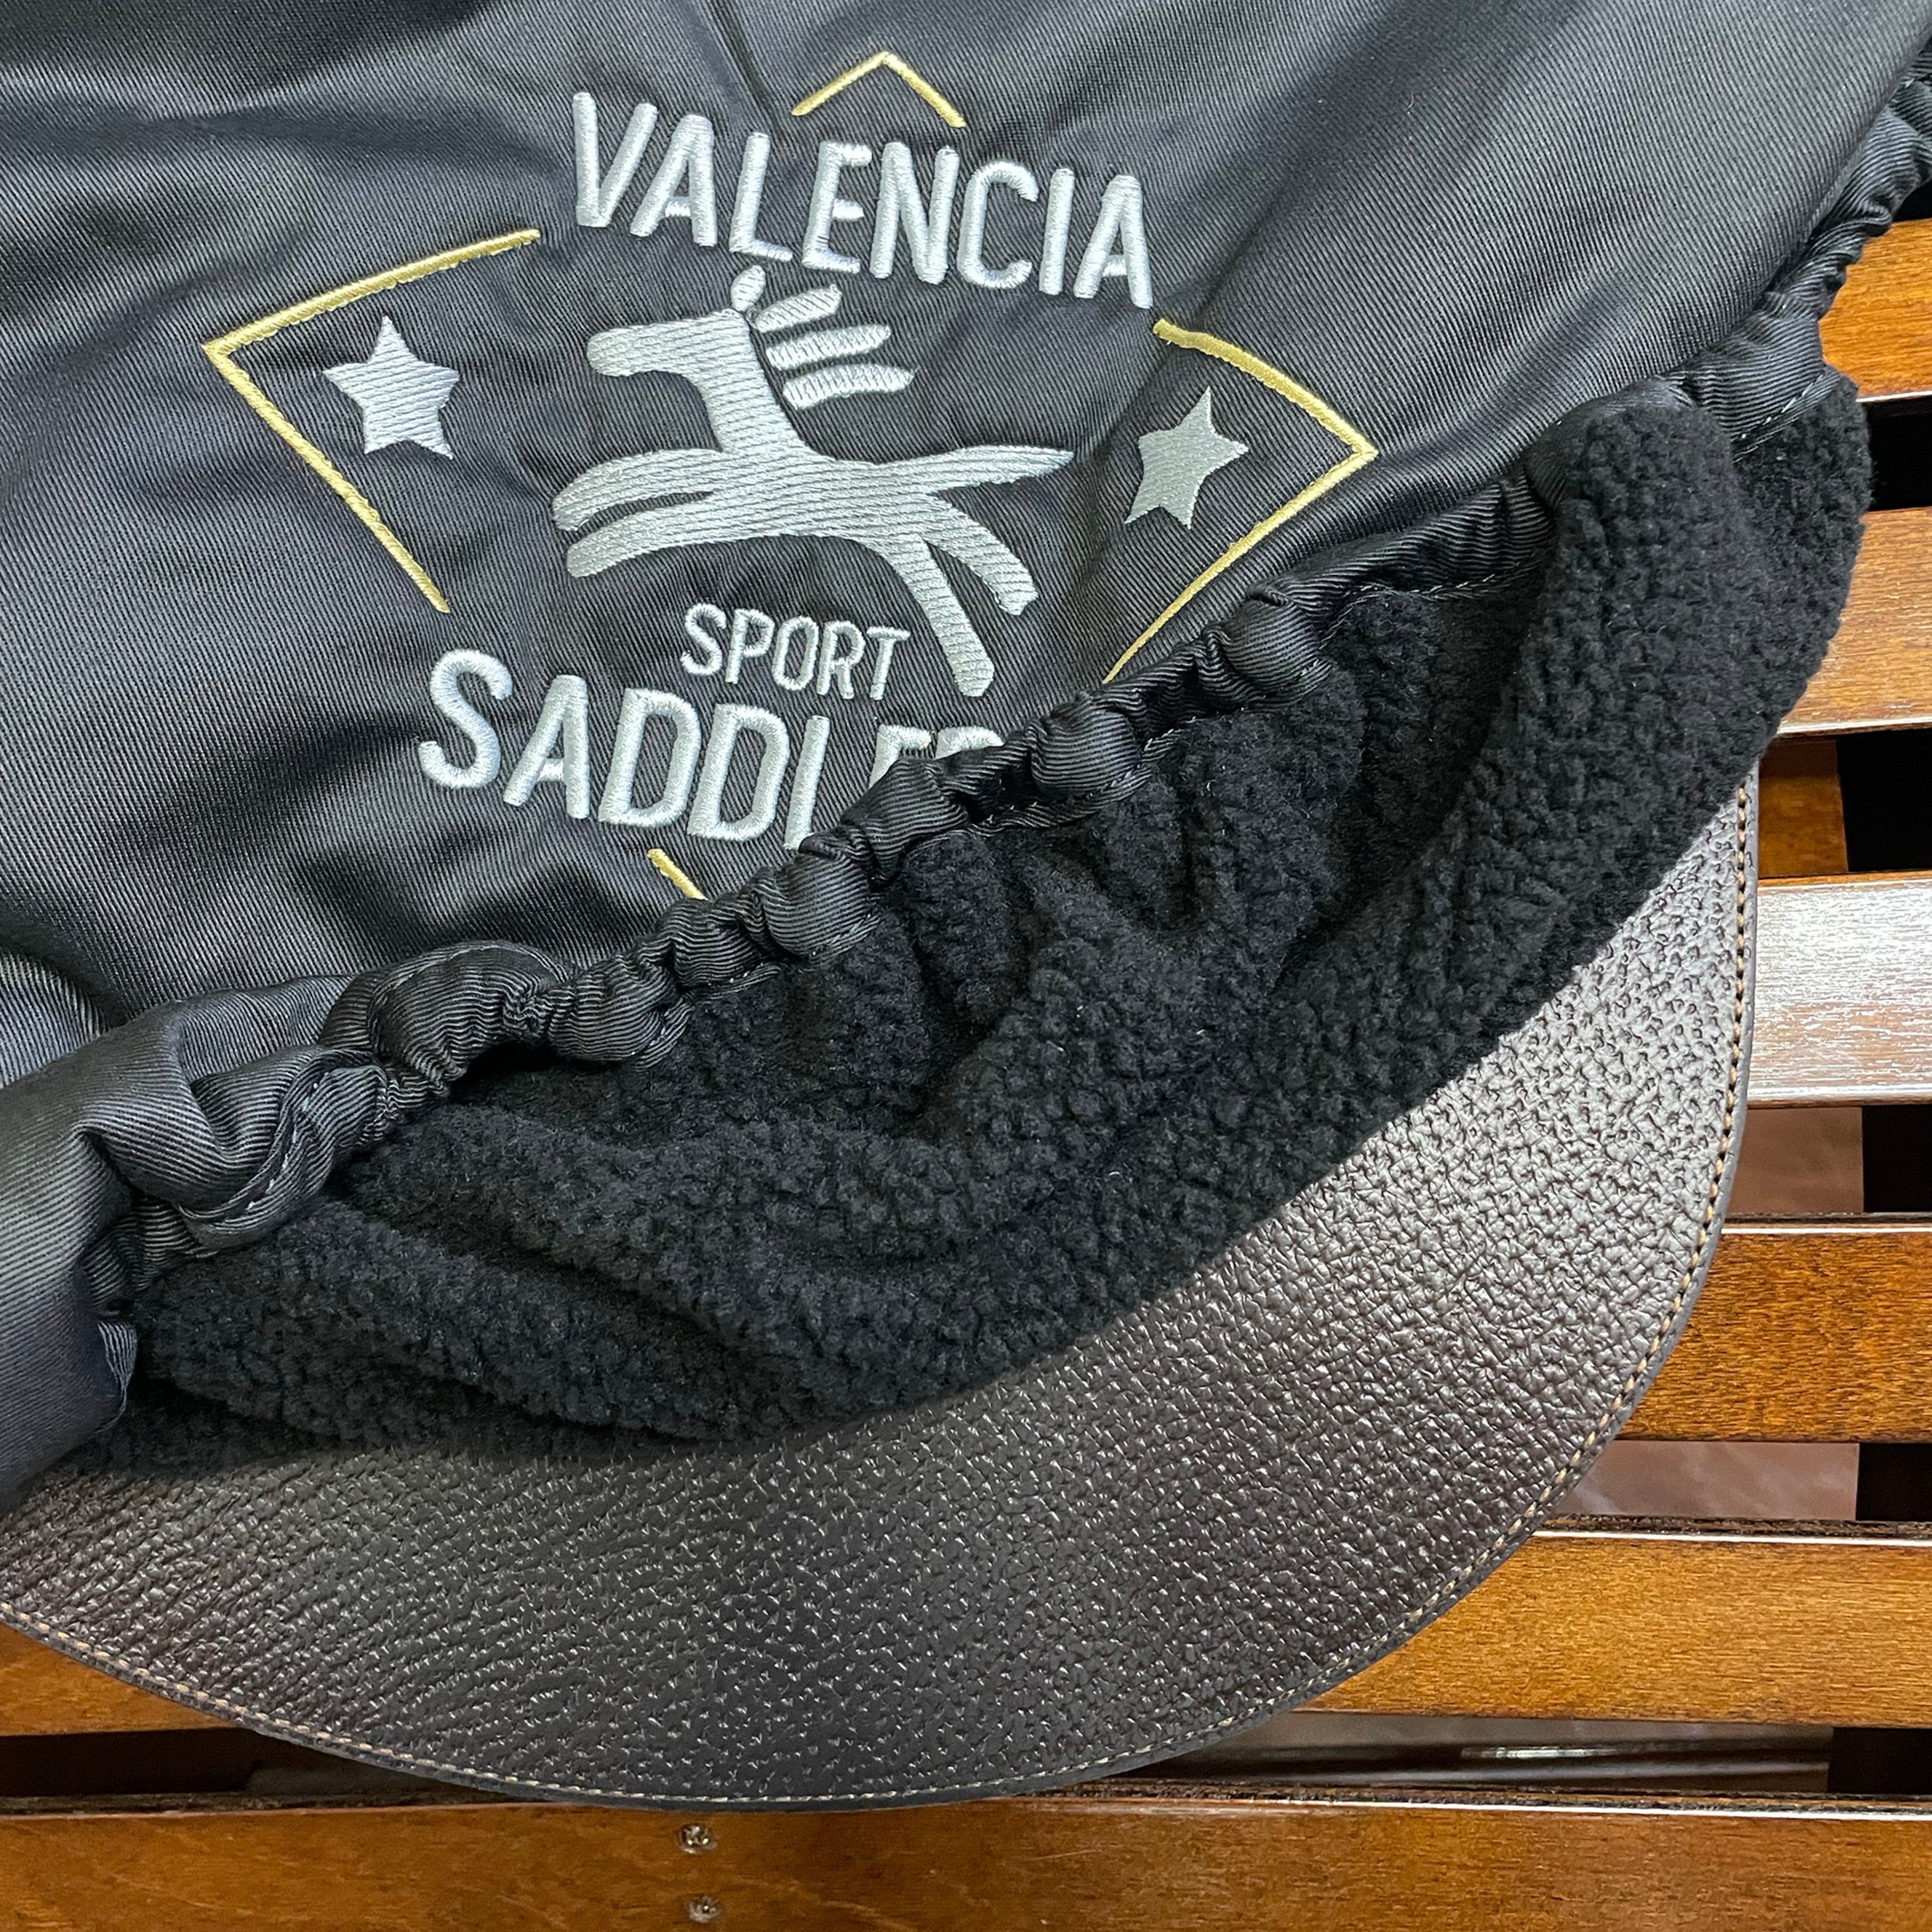 VSS Deluxe Saddle Cover